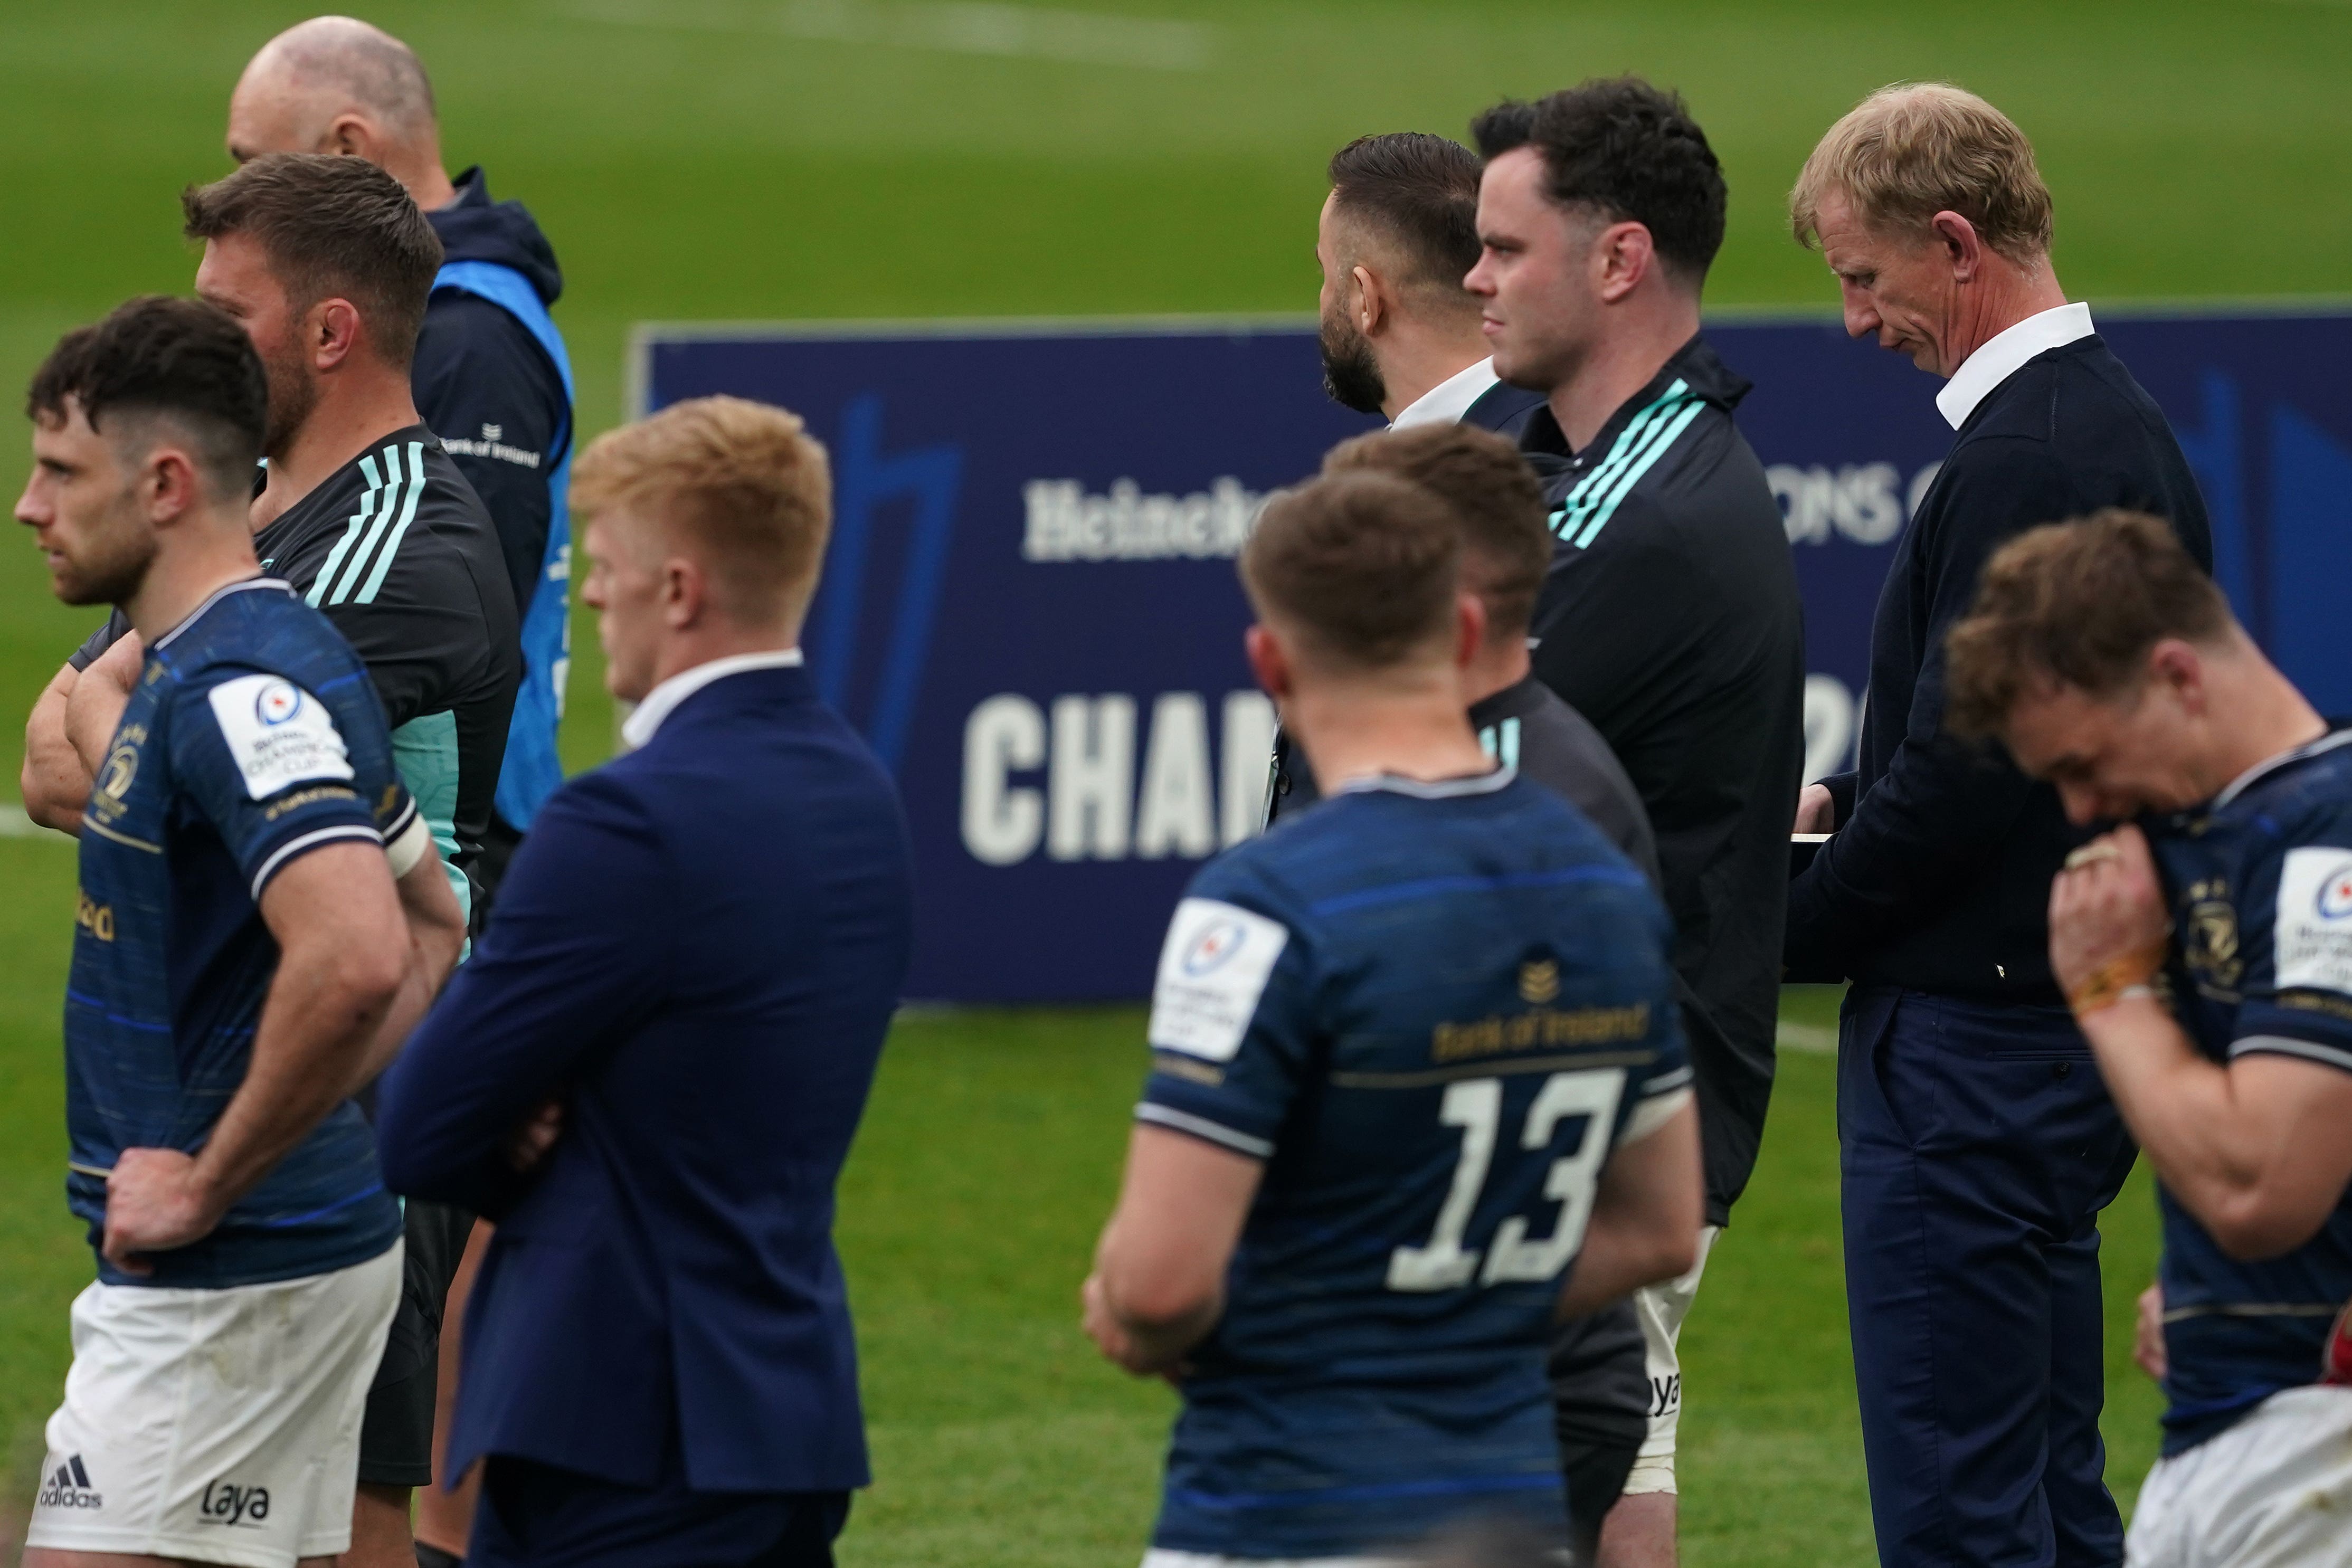 Leinster are looking to bounce back from consecutive final defeats to La Rochelle